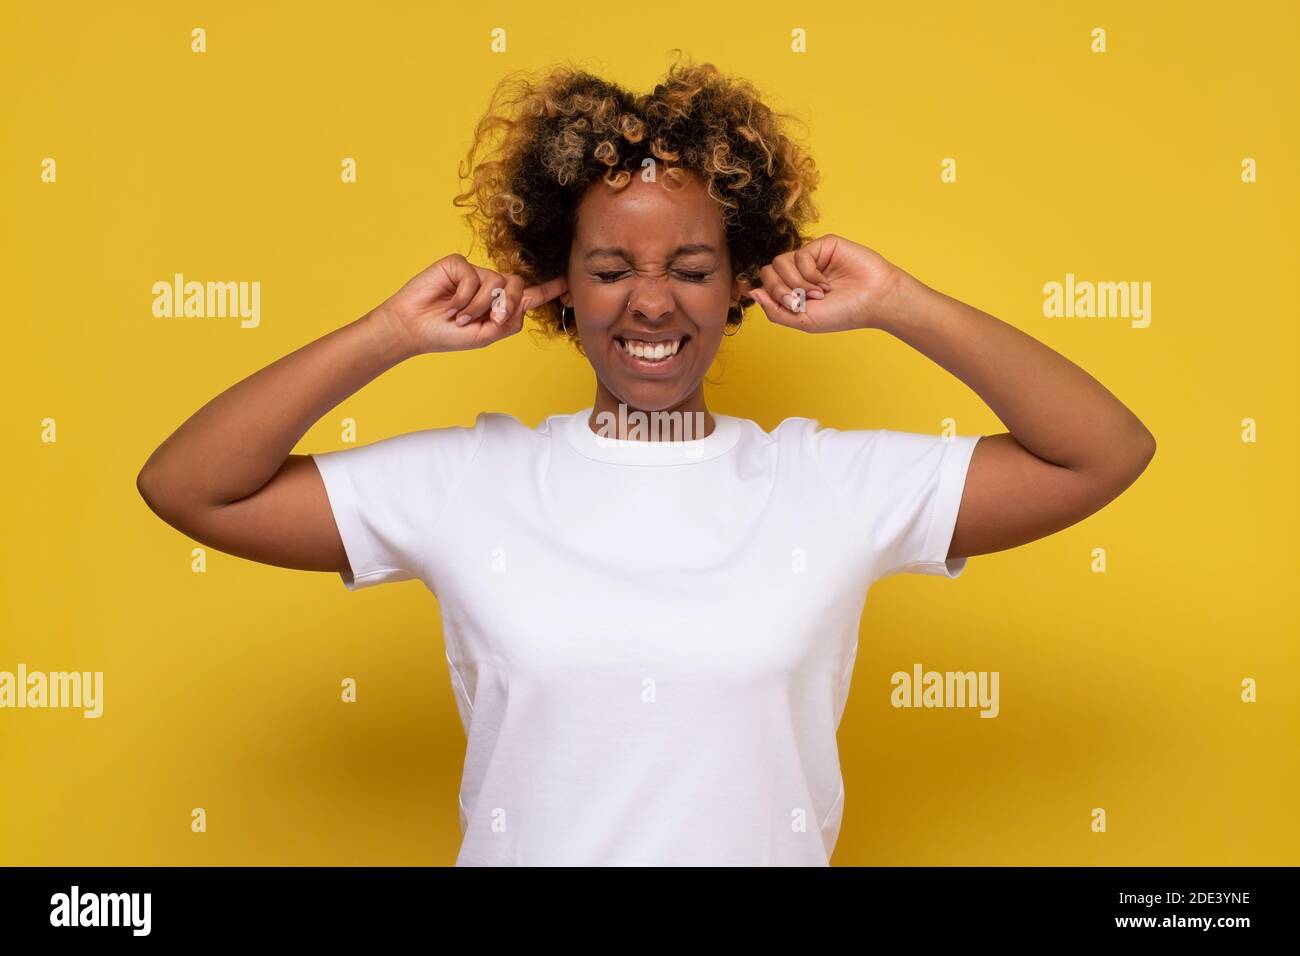 African young woman with curly hair plugging ears. Studio shot on yellow wall. Stock Photo